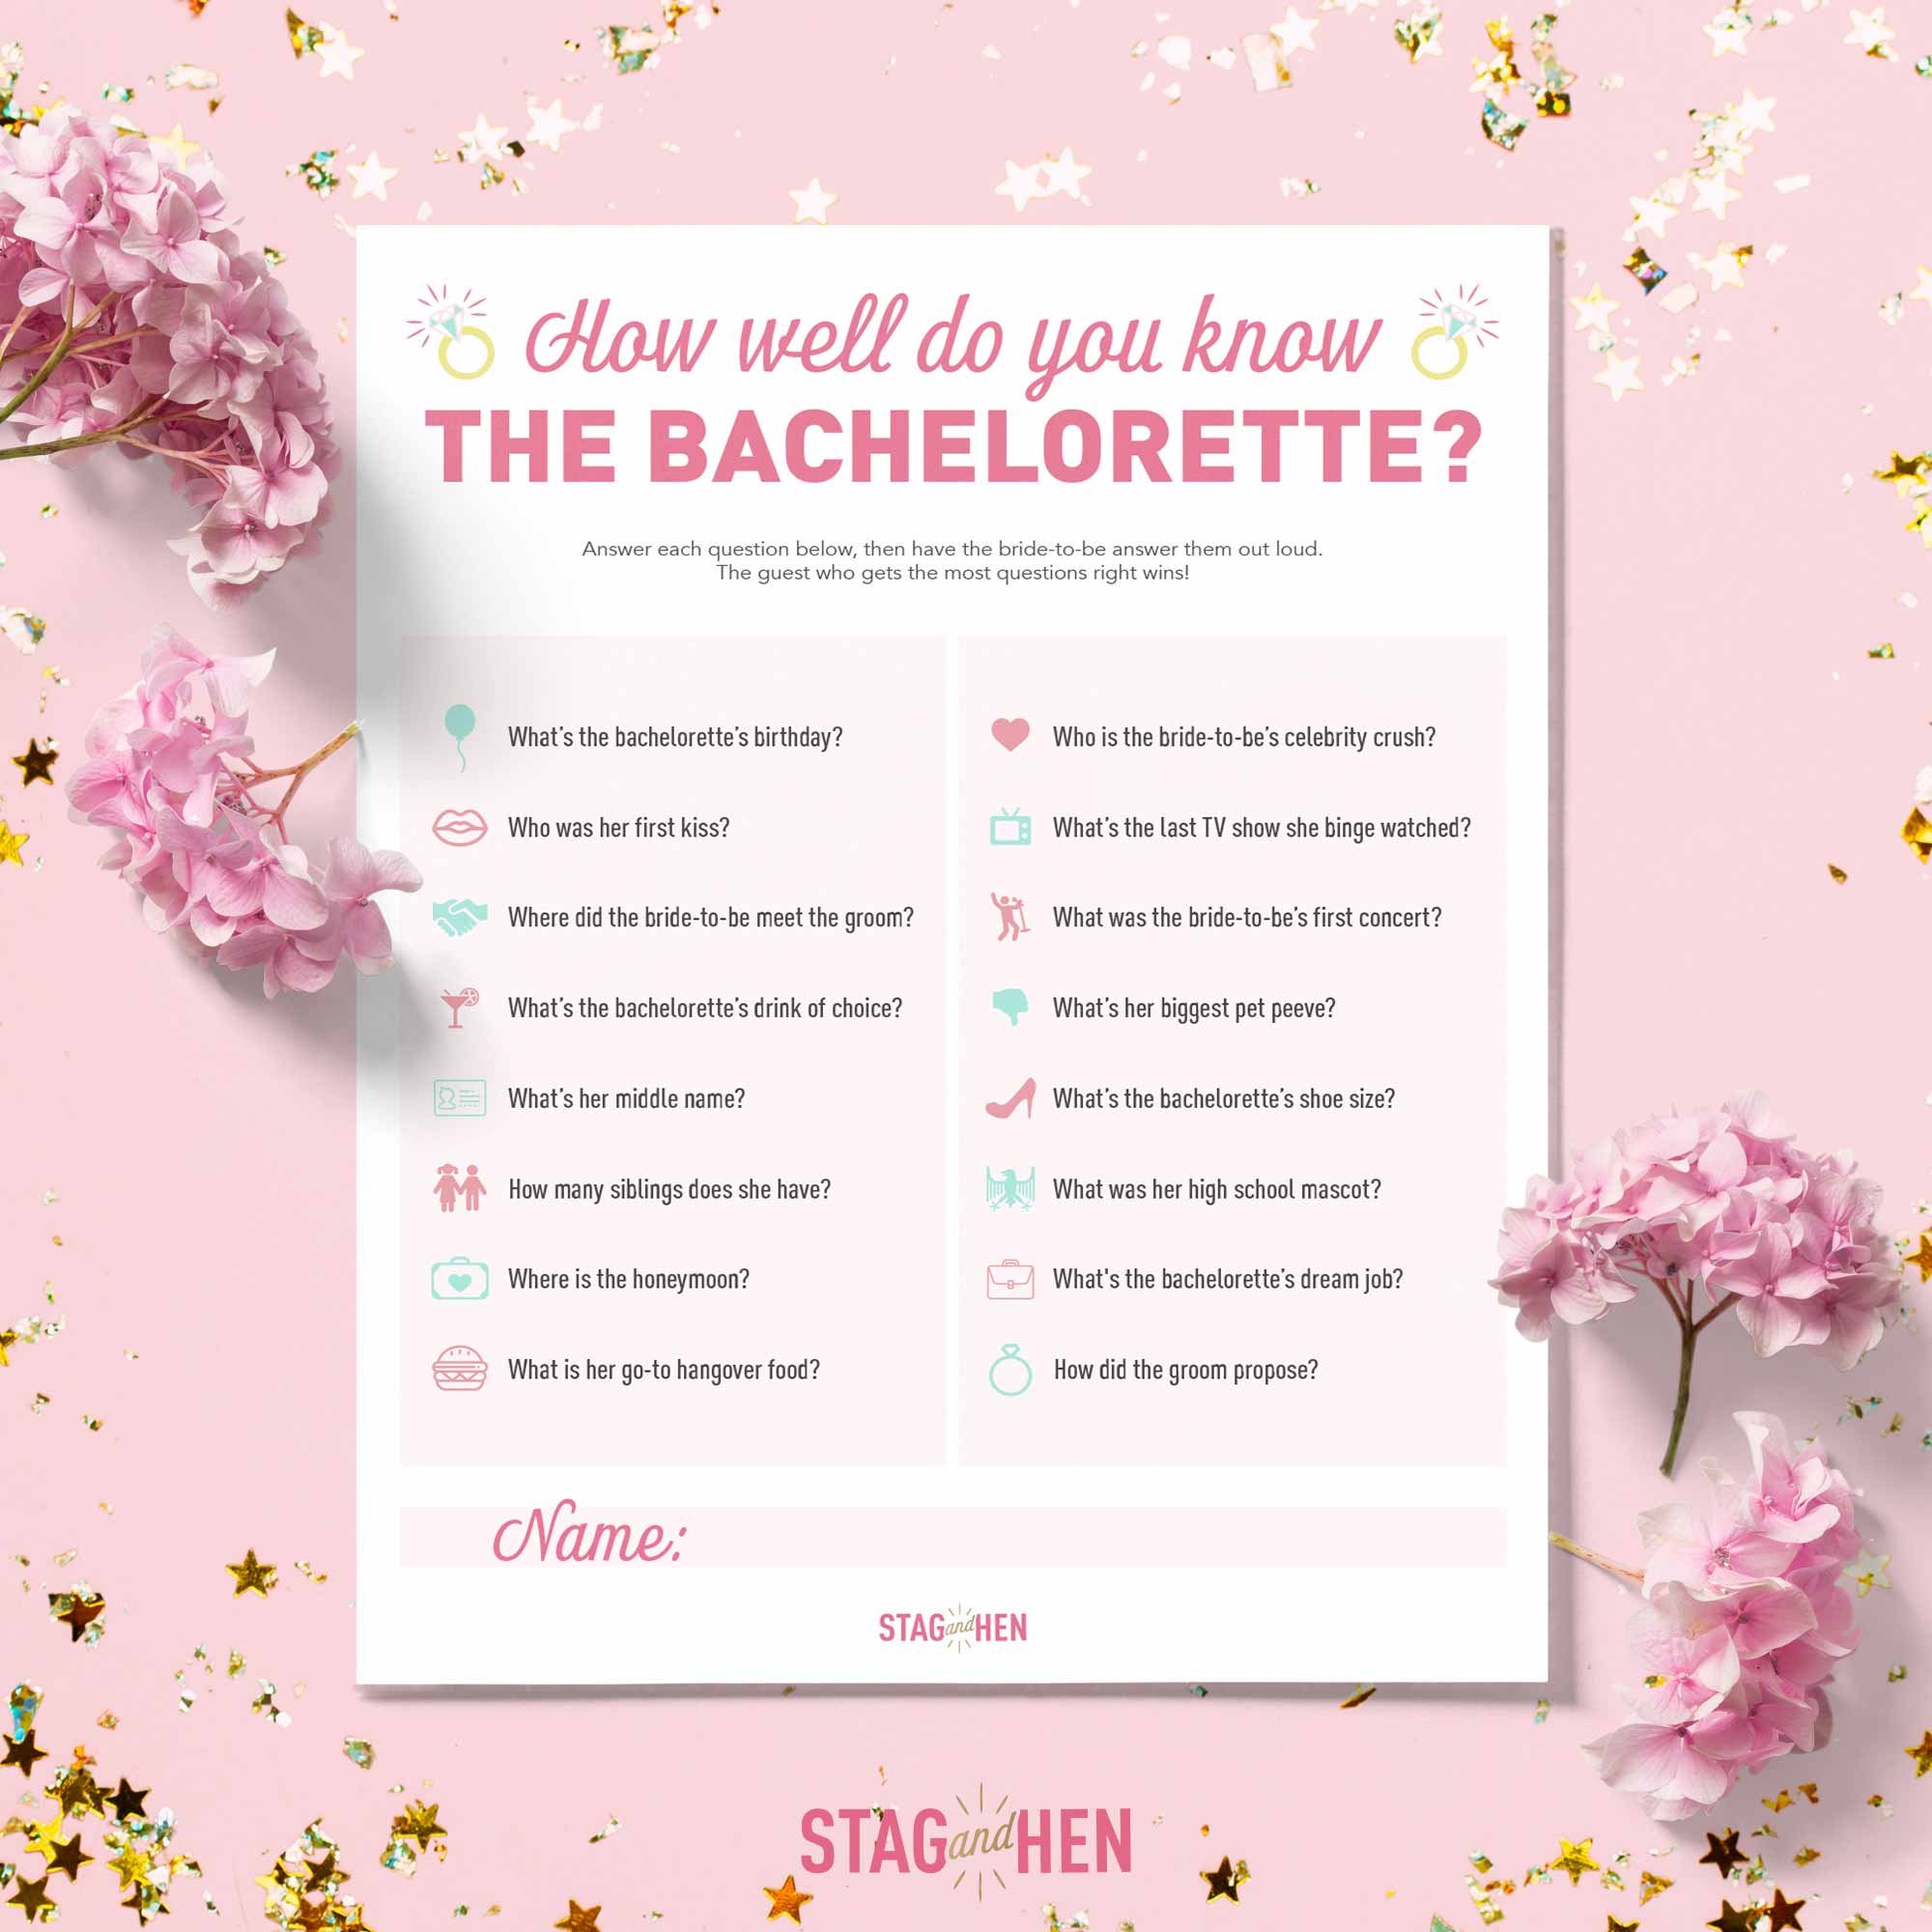 20 Hilarious Bachelorette Party Games that'll Have You Laughing All Night